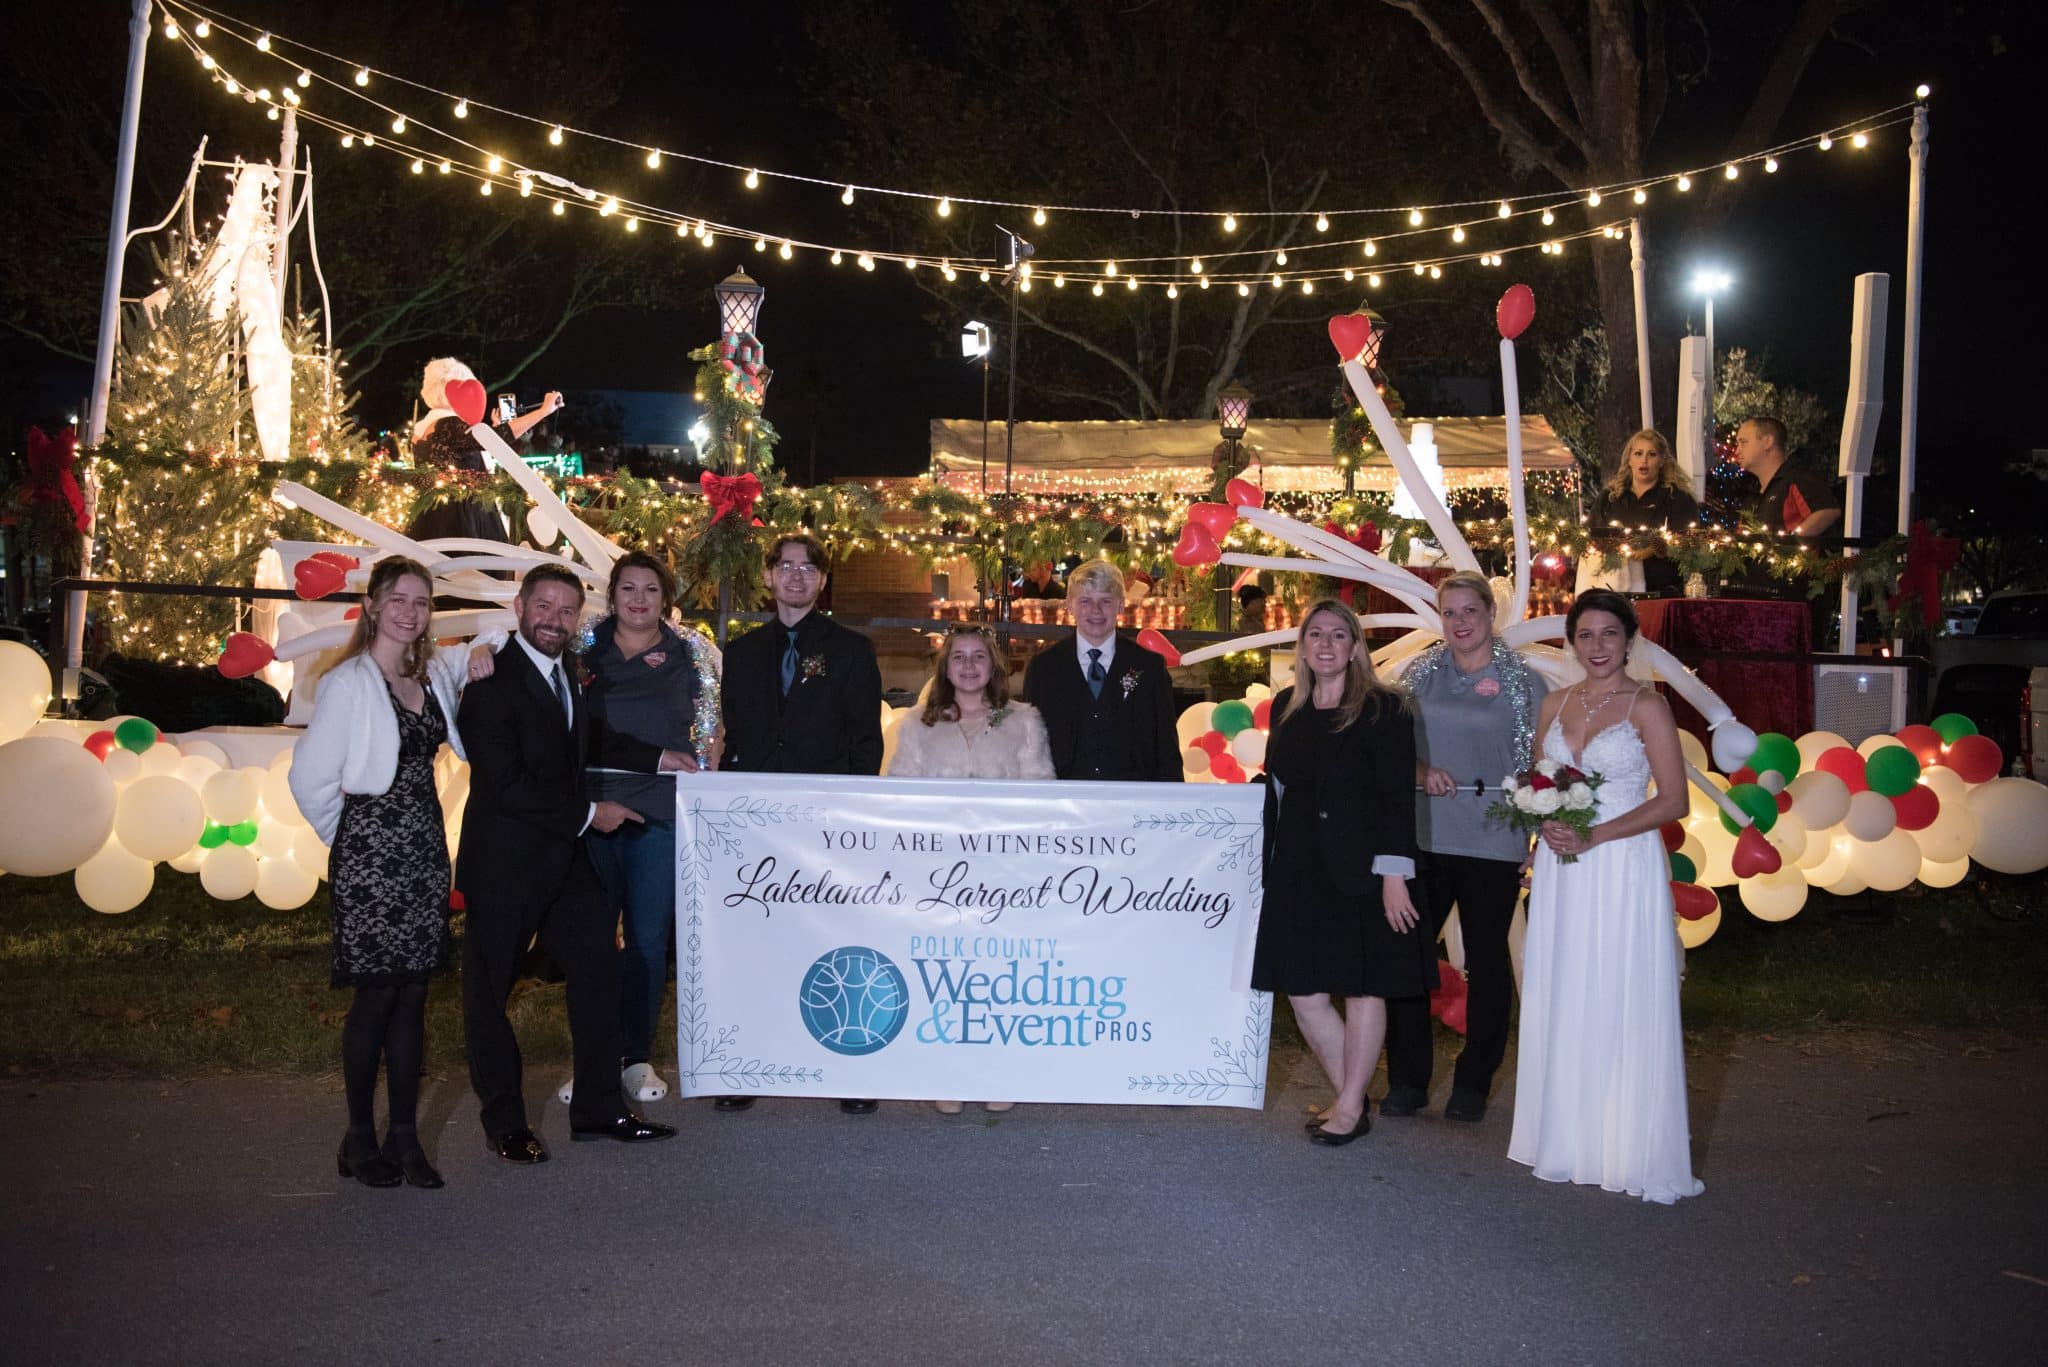 Wedding party gathers in front of Christmas themed parade float holding a sign reading "Lakeland's Largest Wedding by Polk County Wedding & Events Pros"